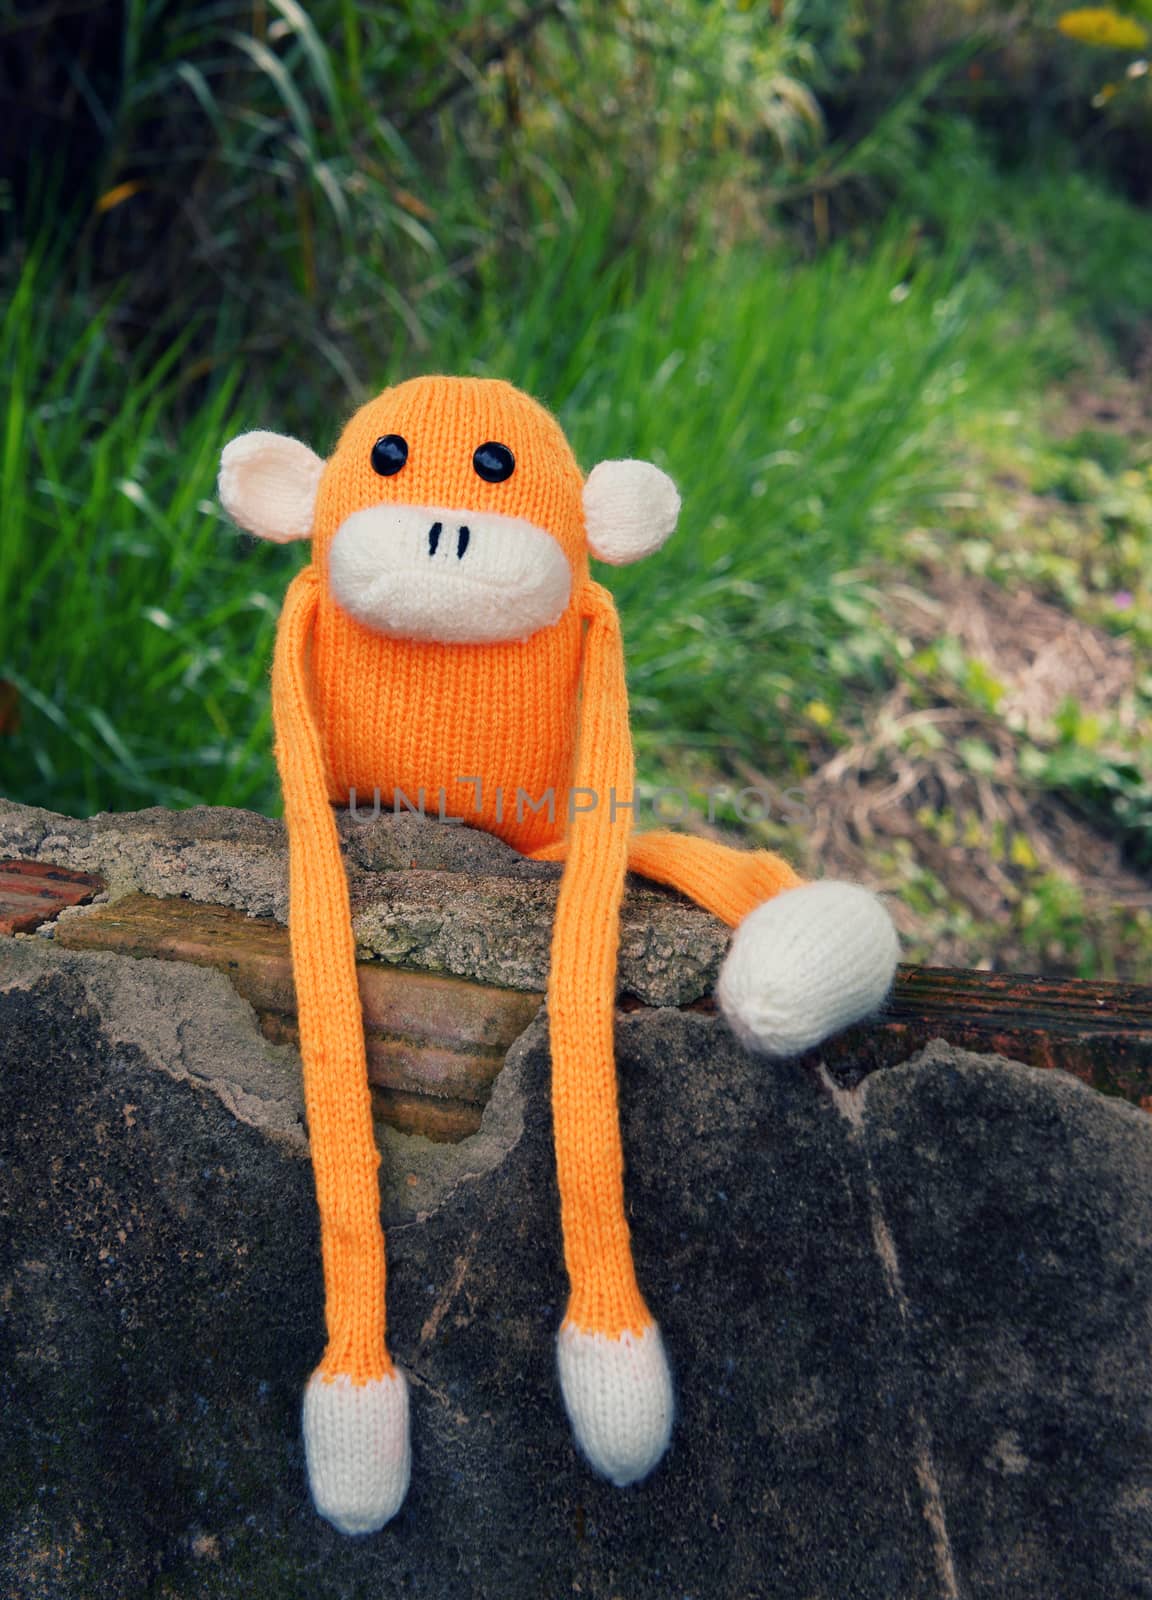 Abstract knitted monkey, symbol of year 2016, handmade toy from yarn, she lie down or sit lonely among nature, happy new year 2016, year of the monkey